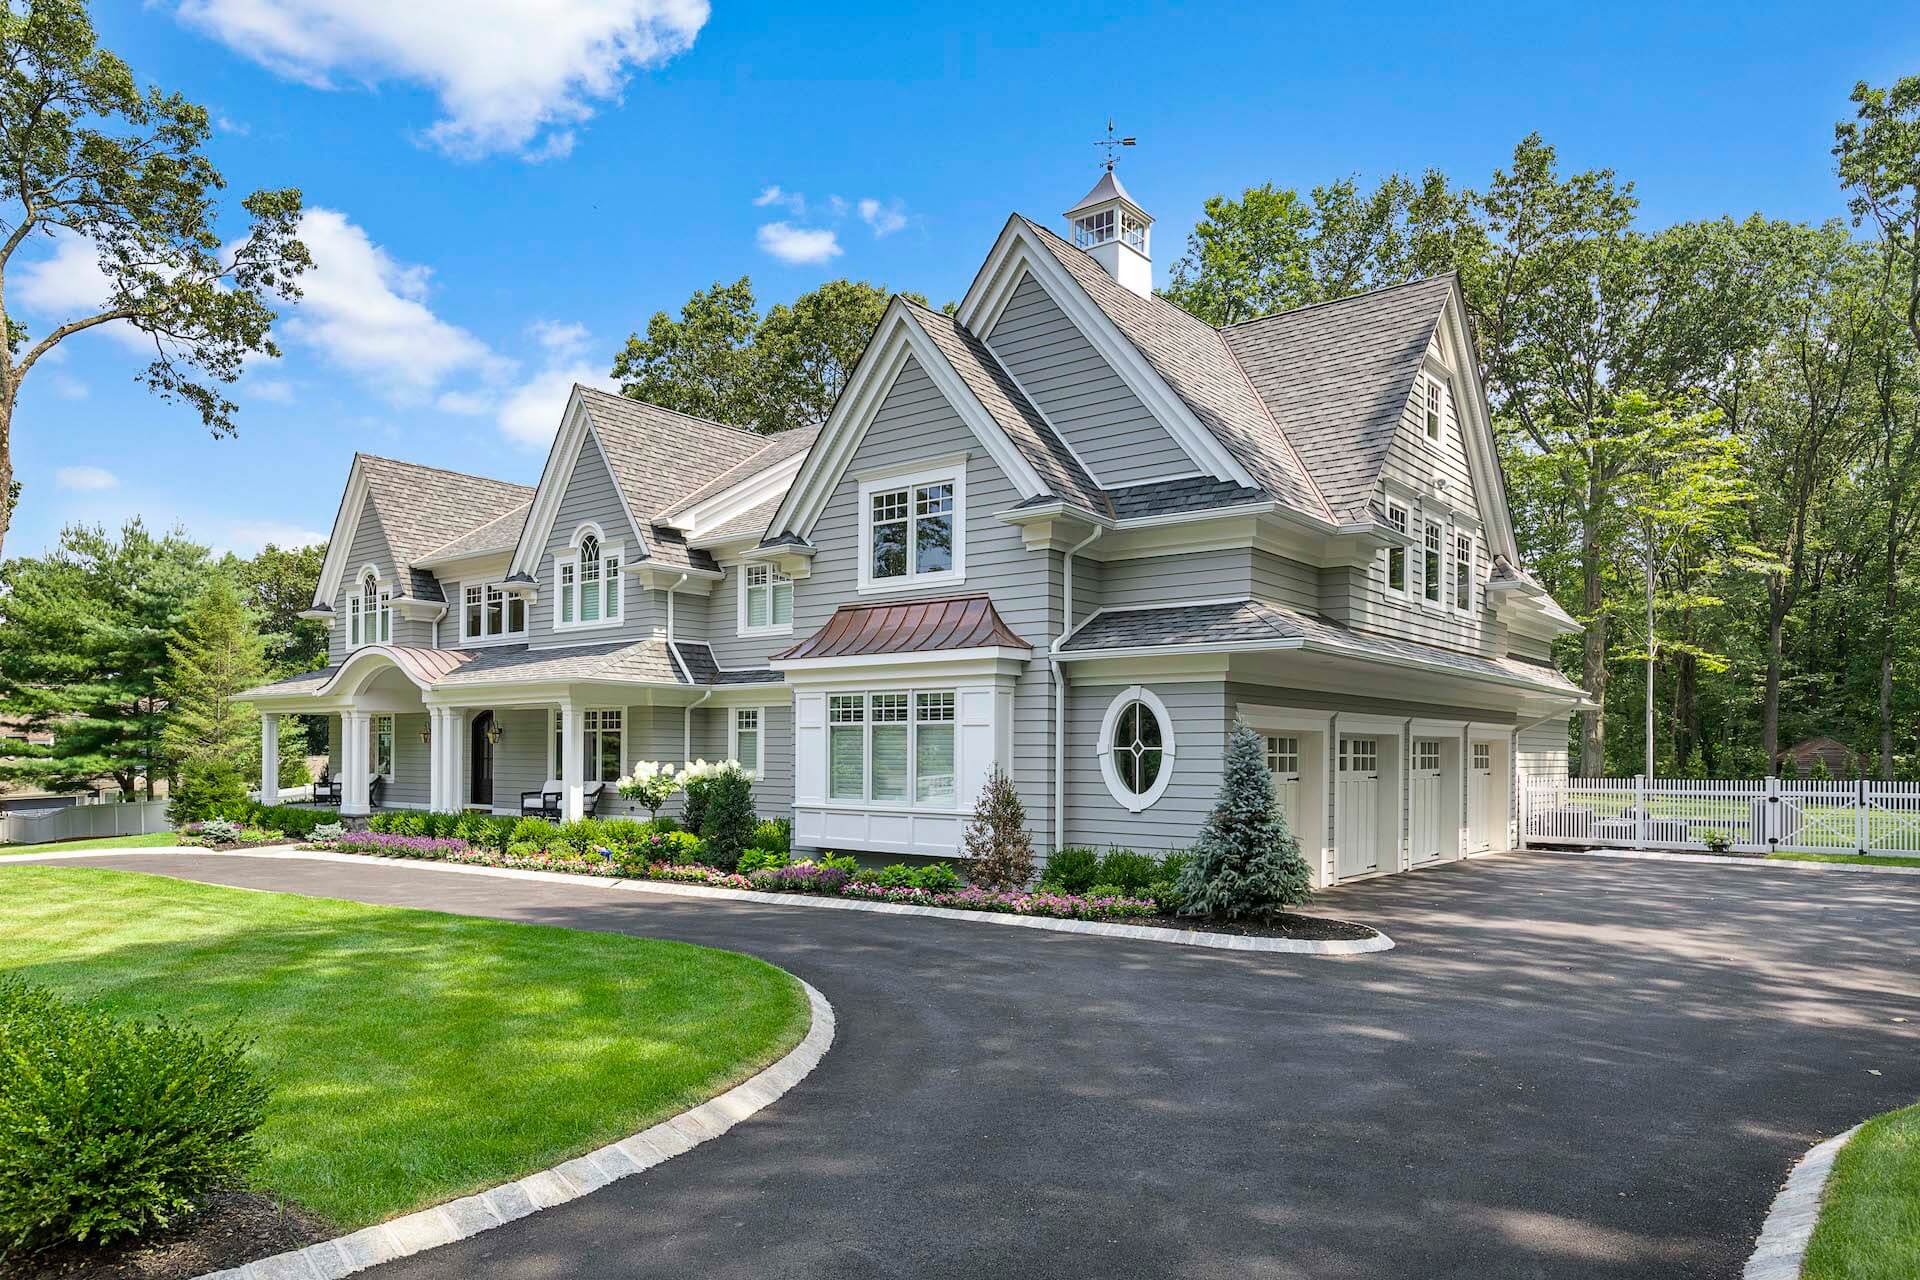 The Complete Guide To Building Your Dream Home in New Jersey